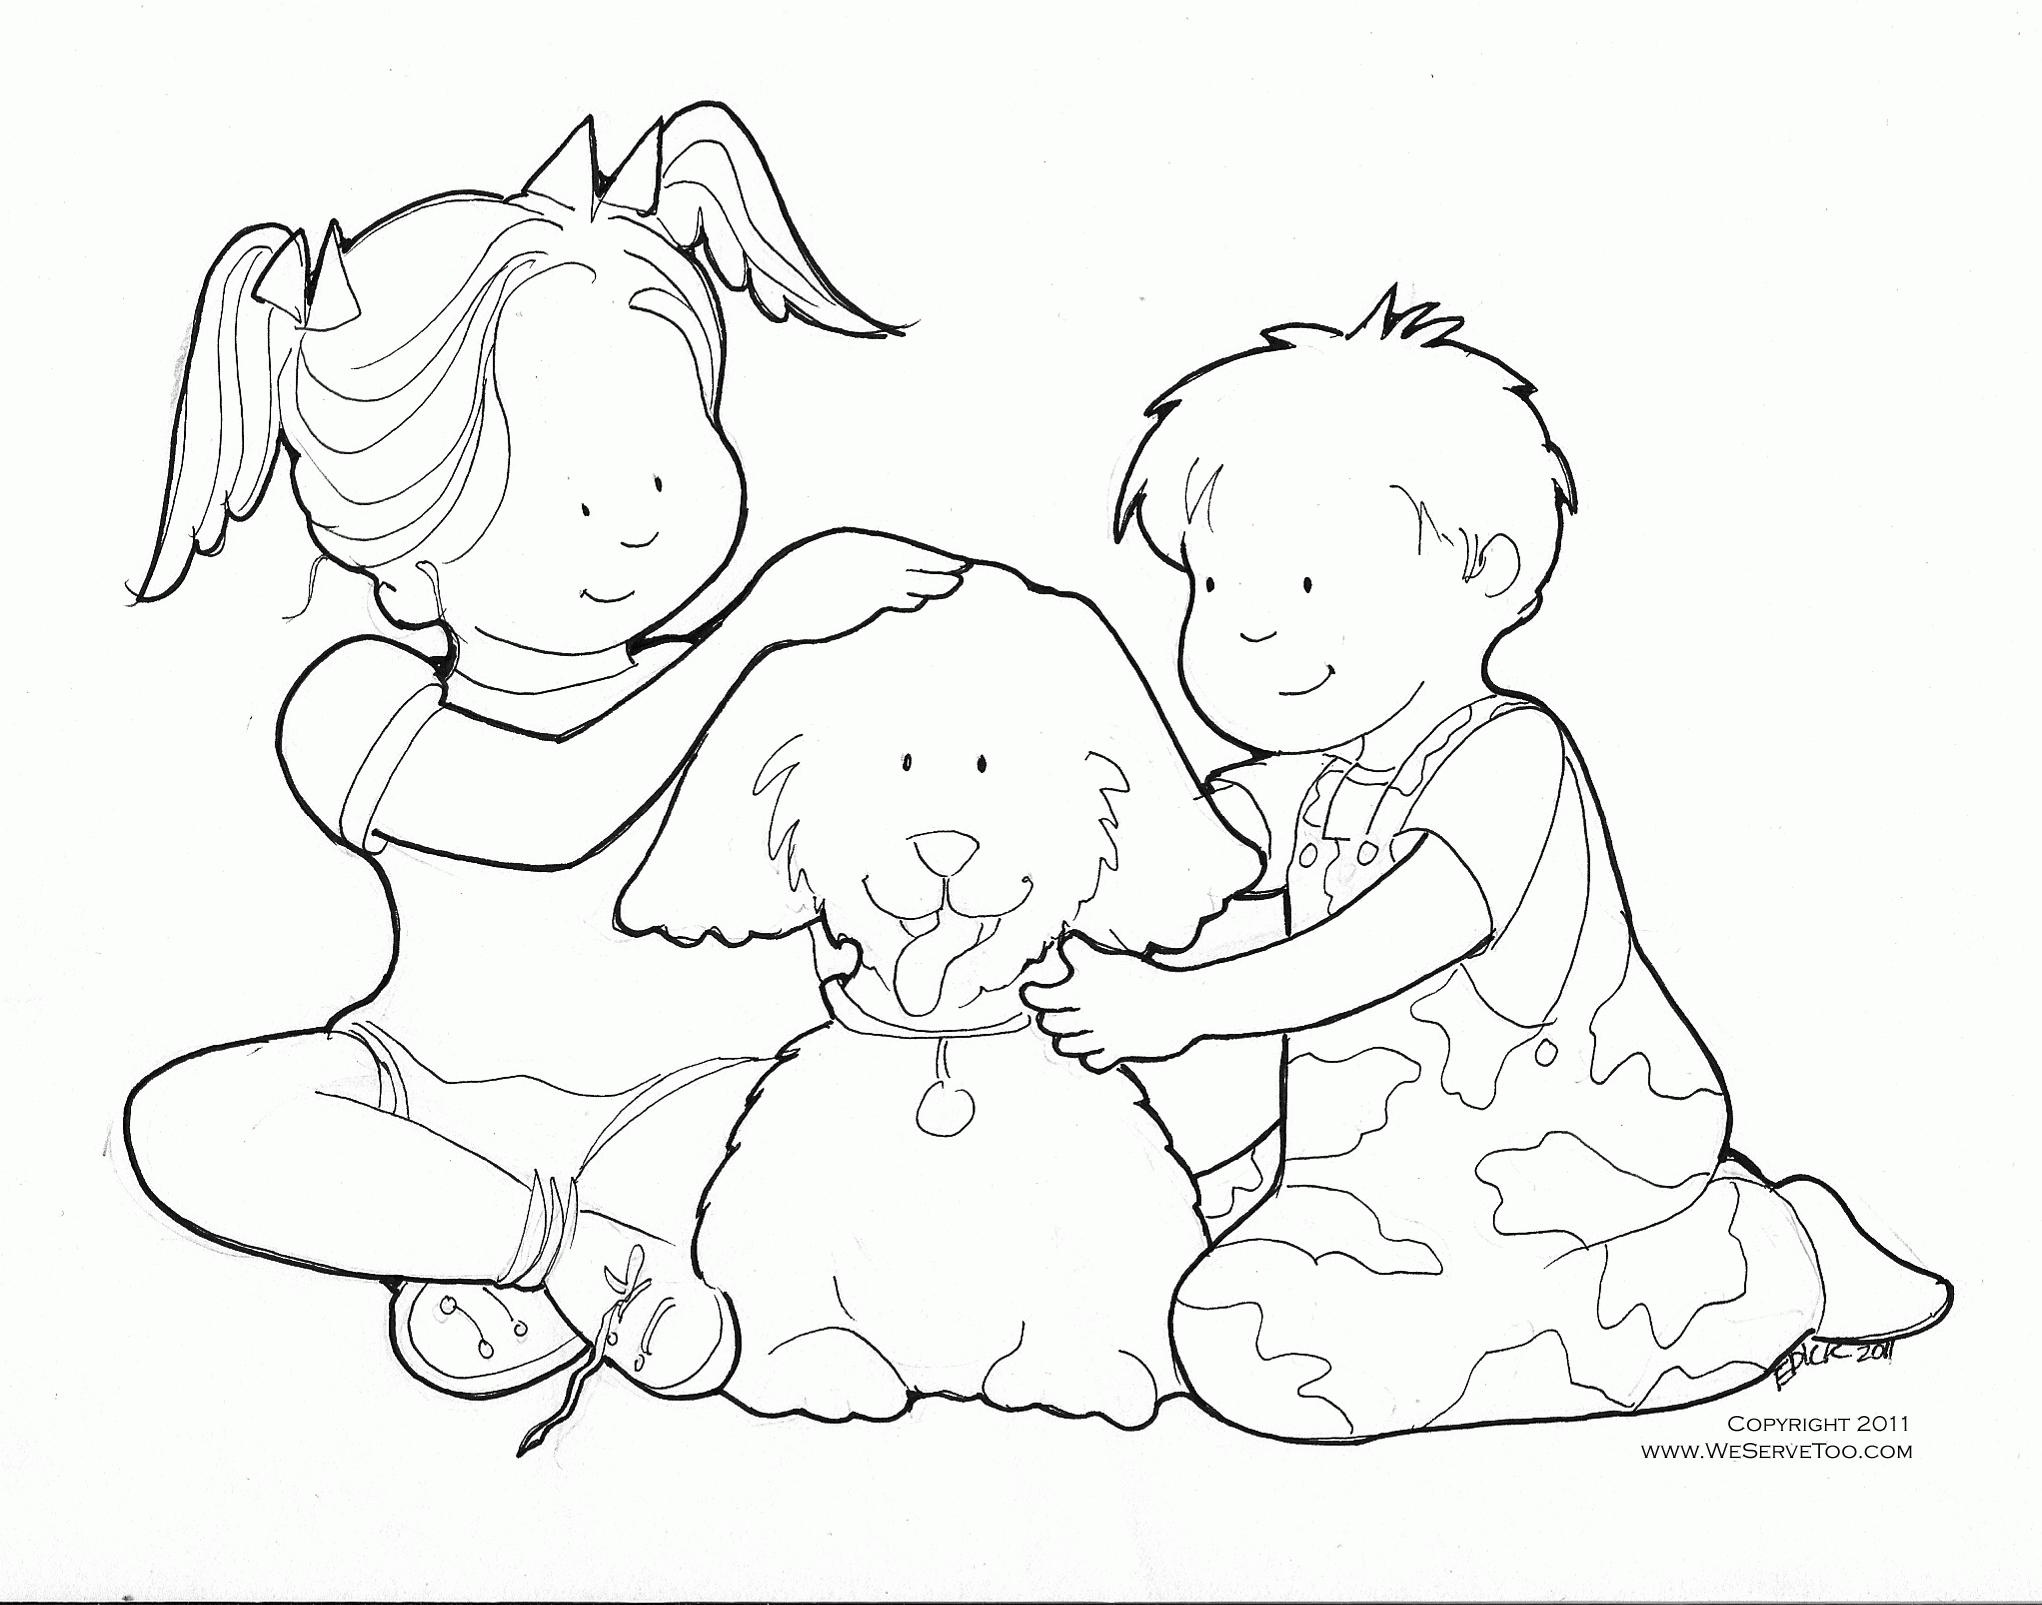 Download Kids Helping Each Other Coloring Page - Coloring Home